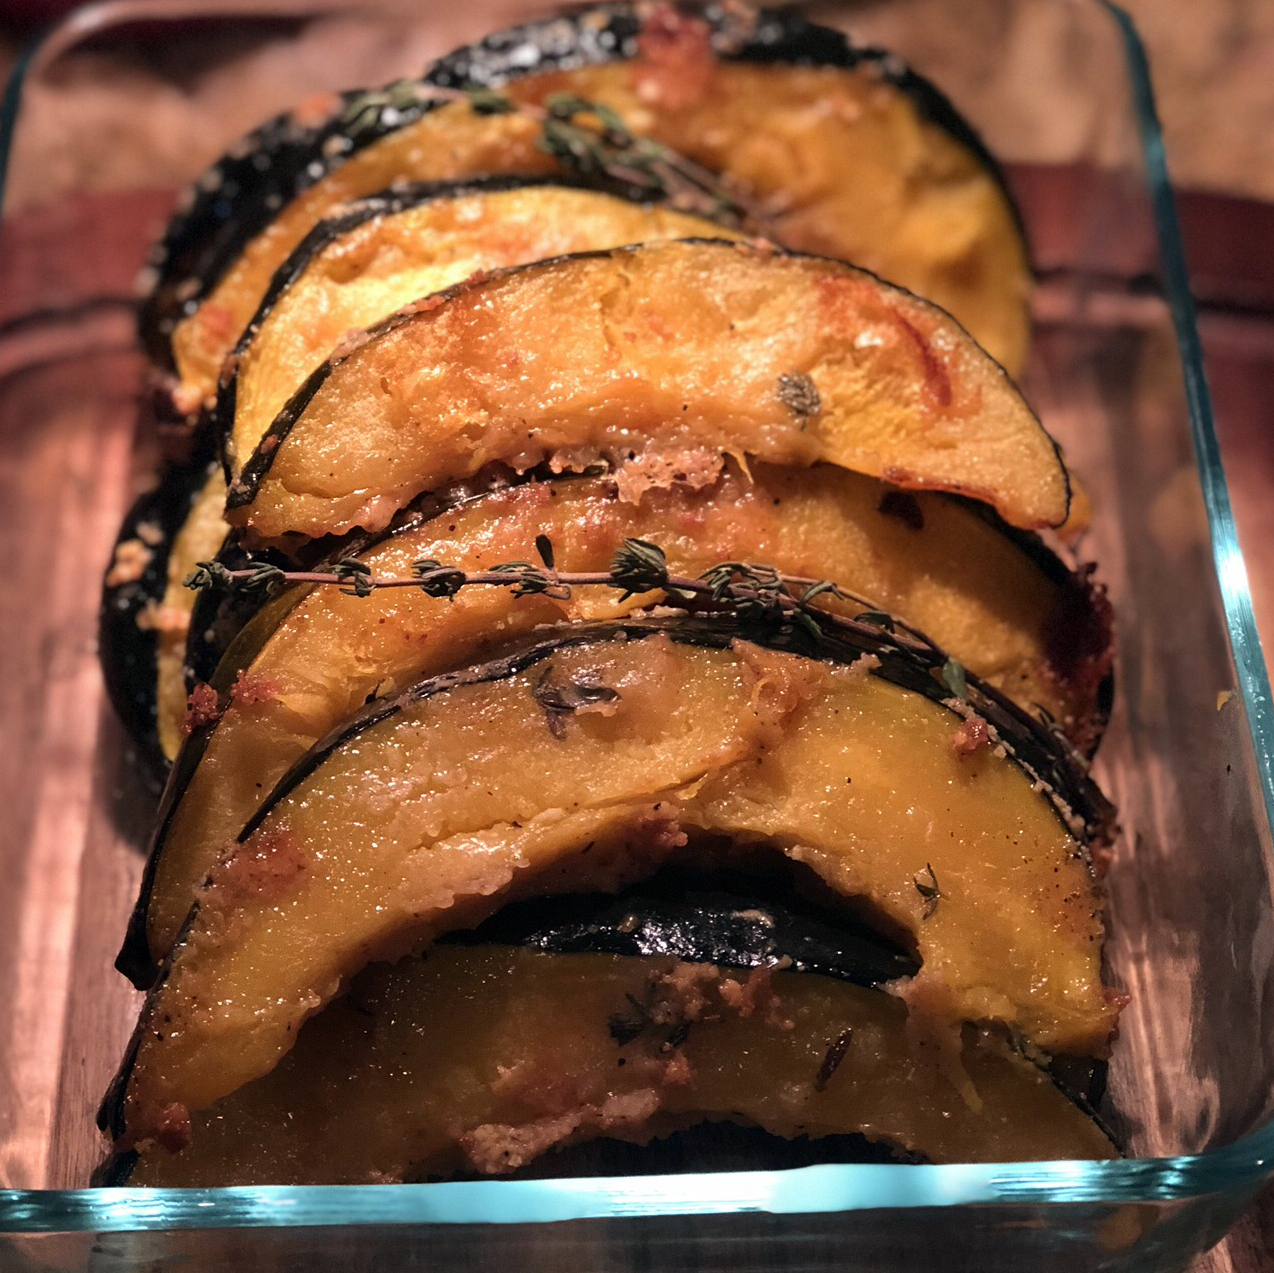 wedges of deep orange roasted squash in a glass baking dish garnished with a thyme sprig